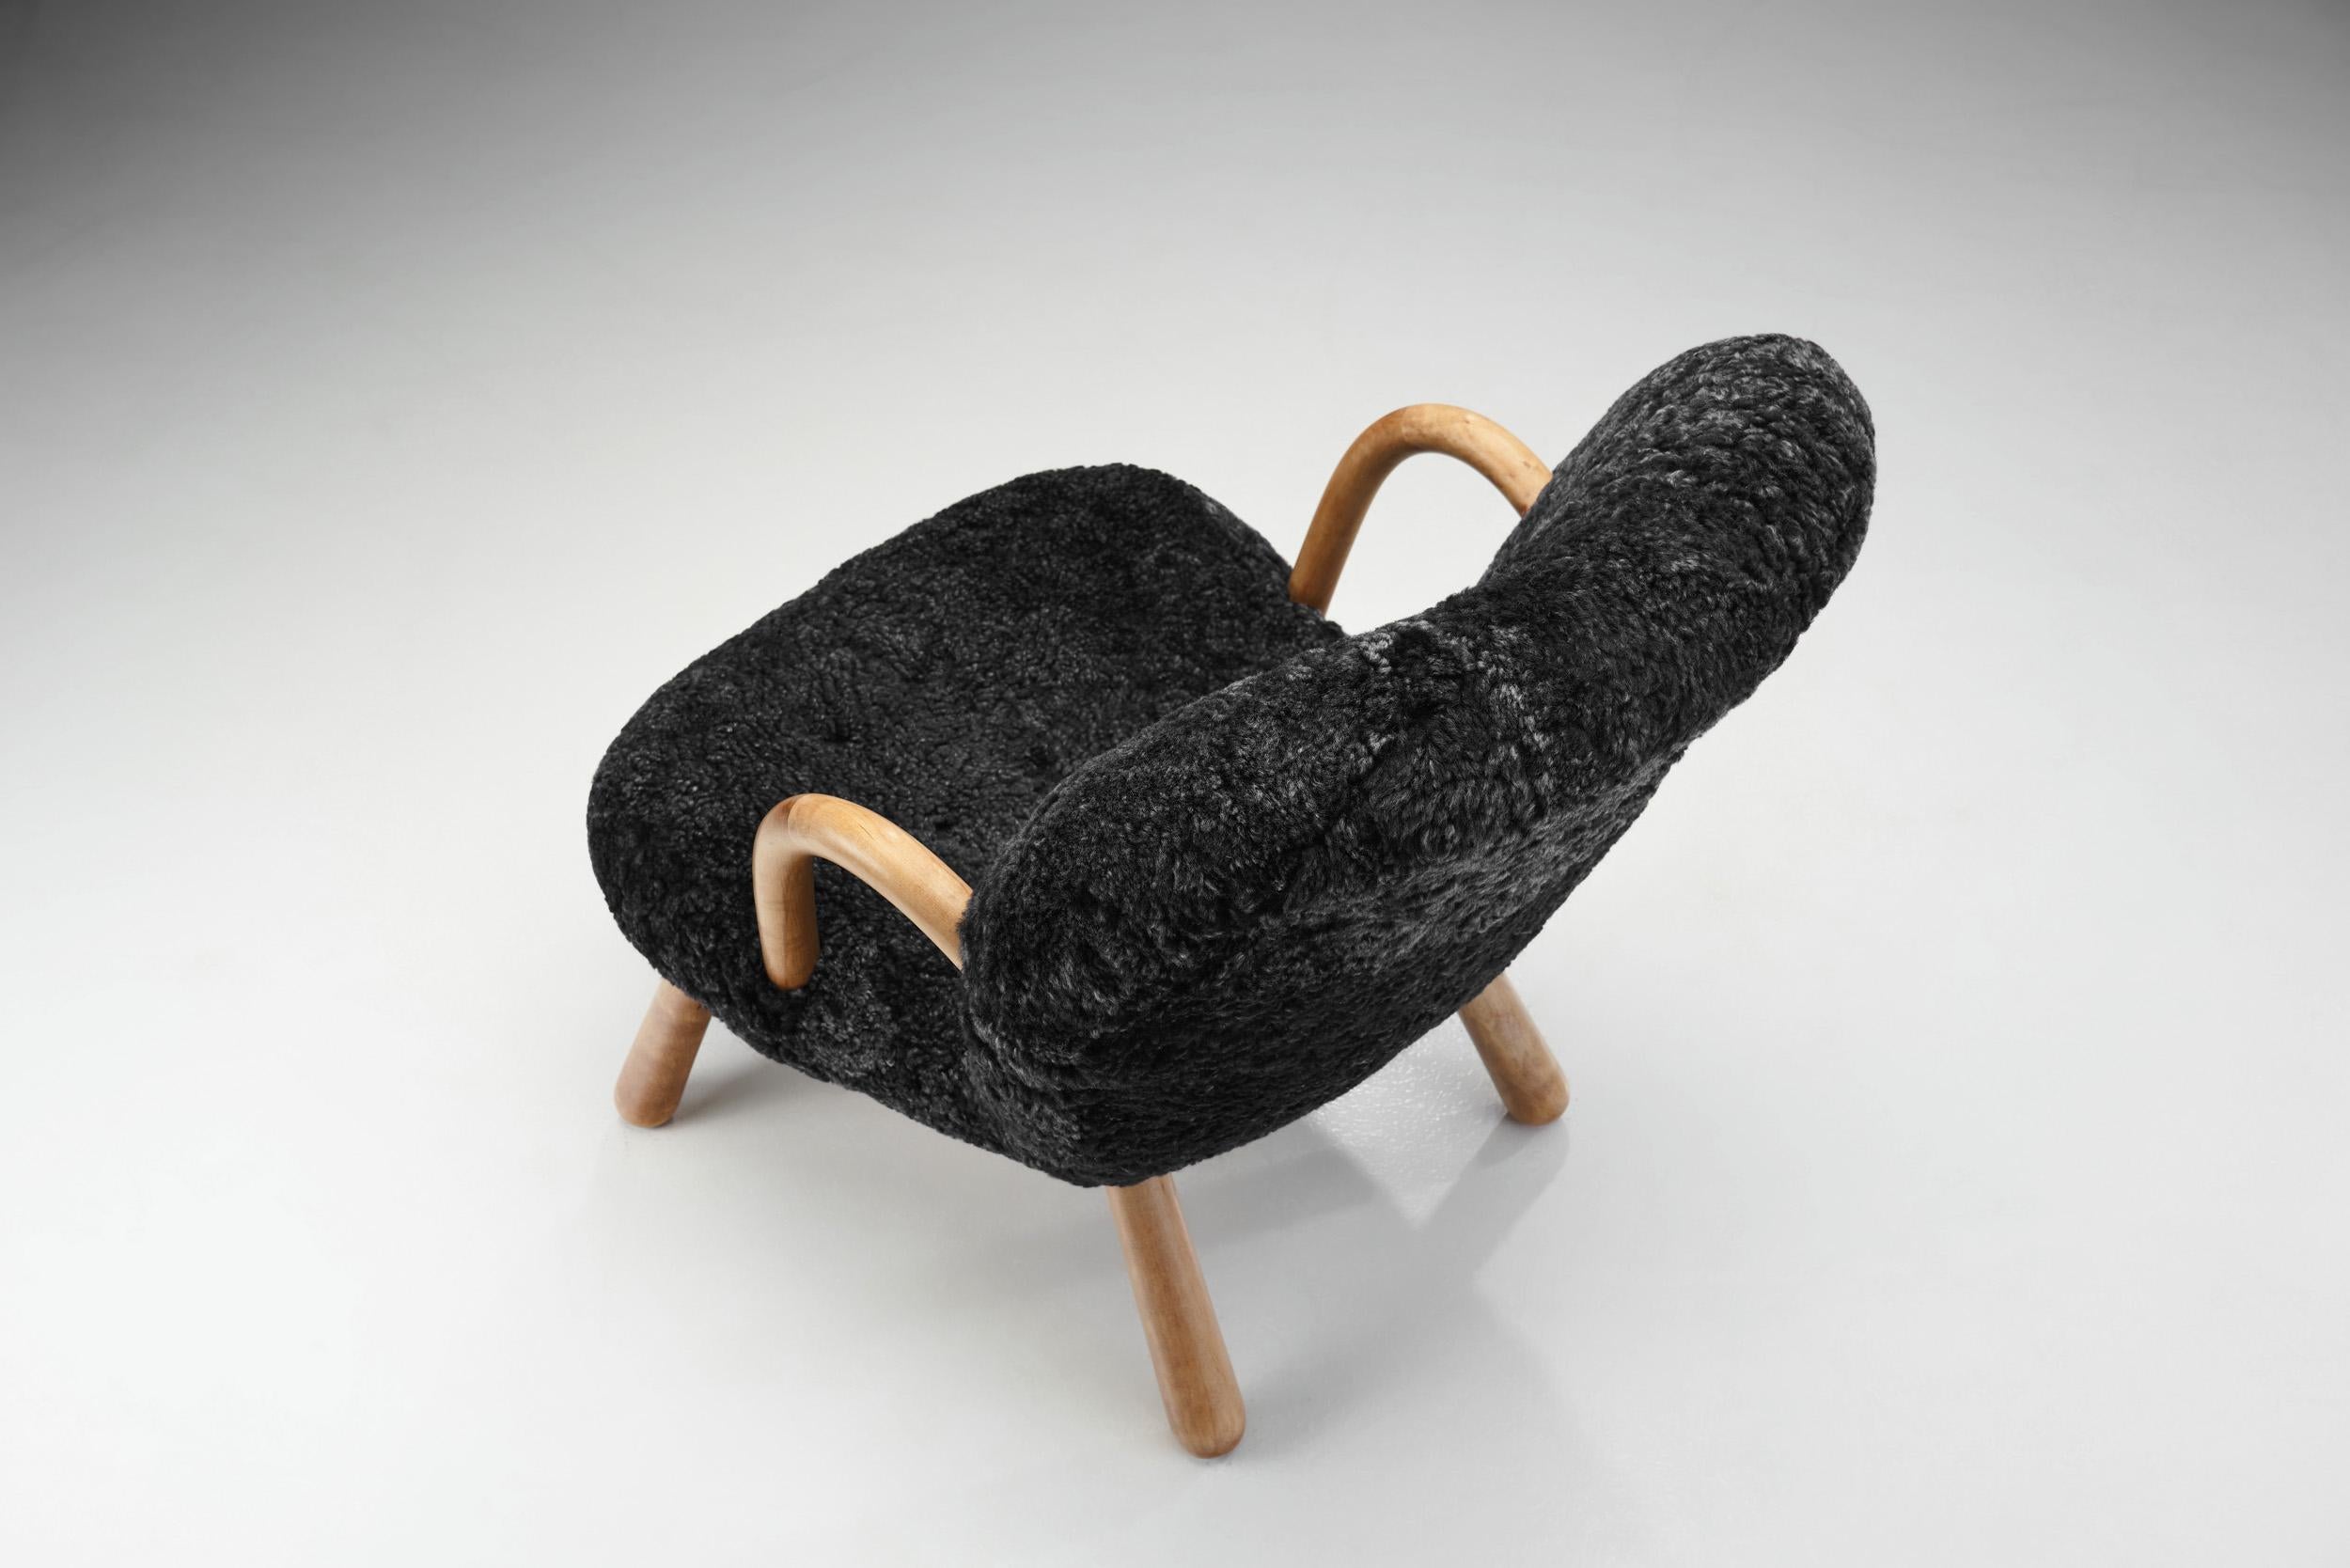 “Clam Chair